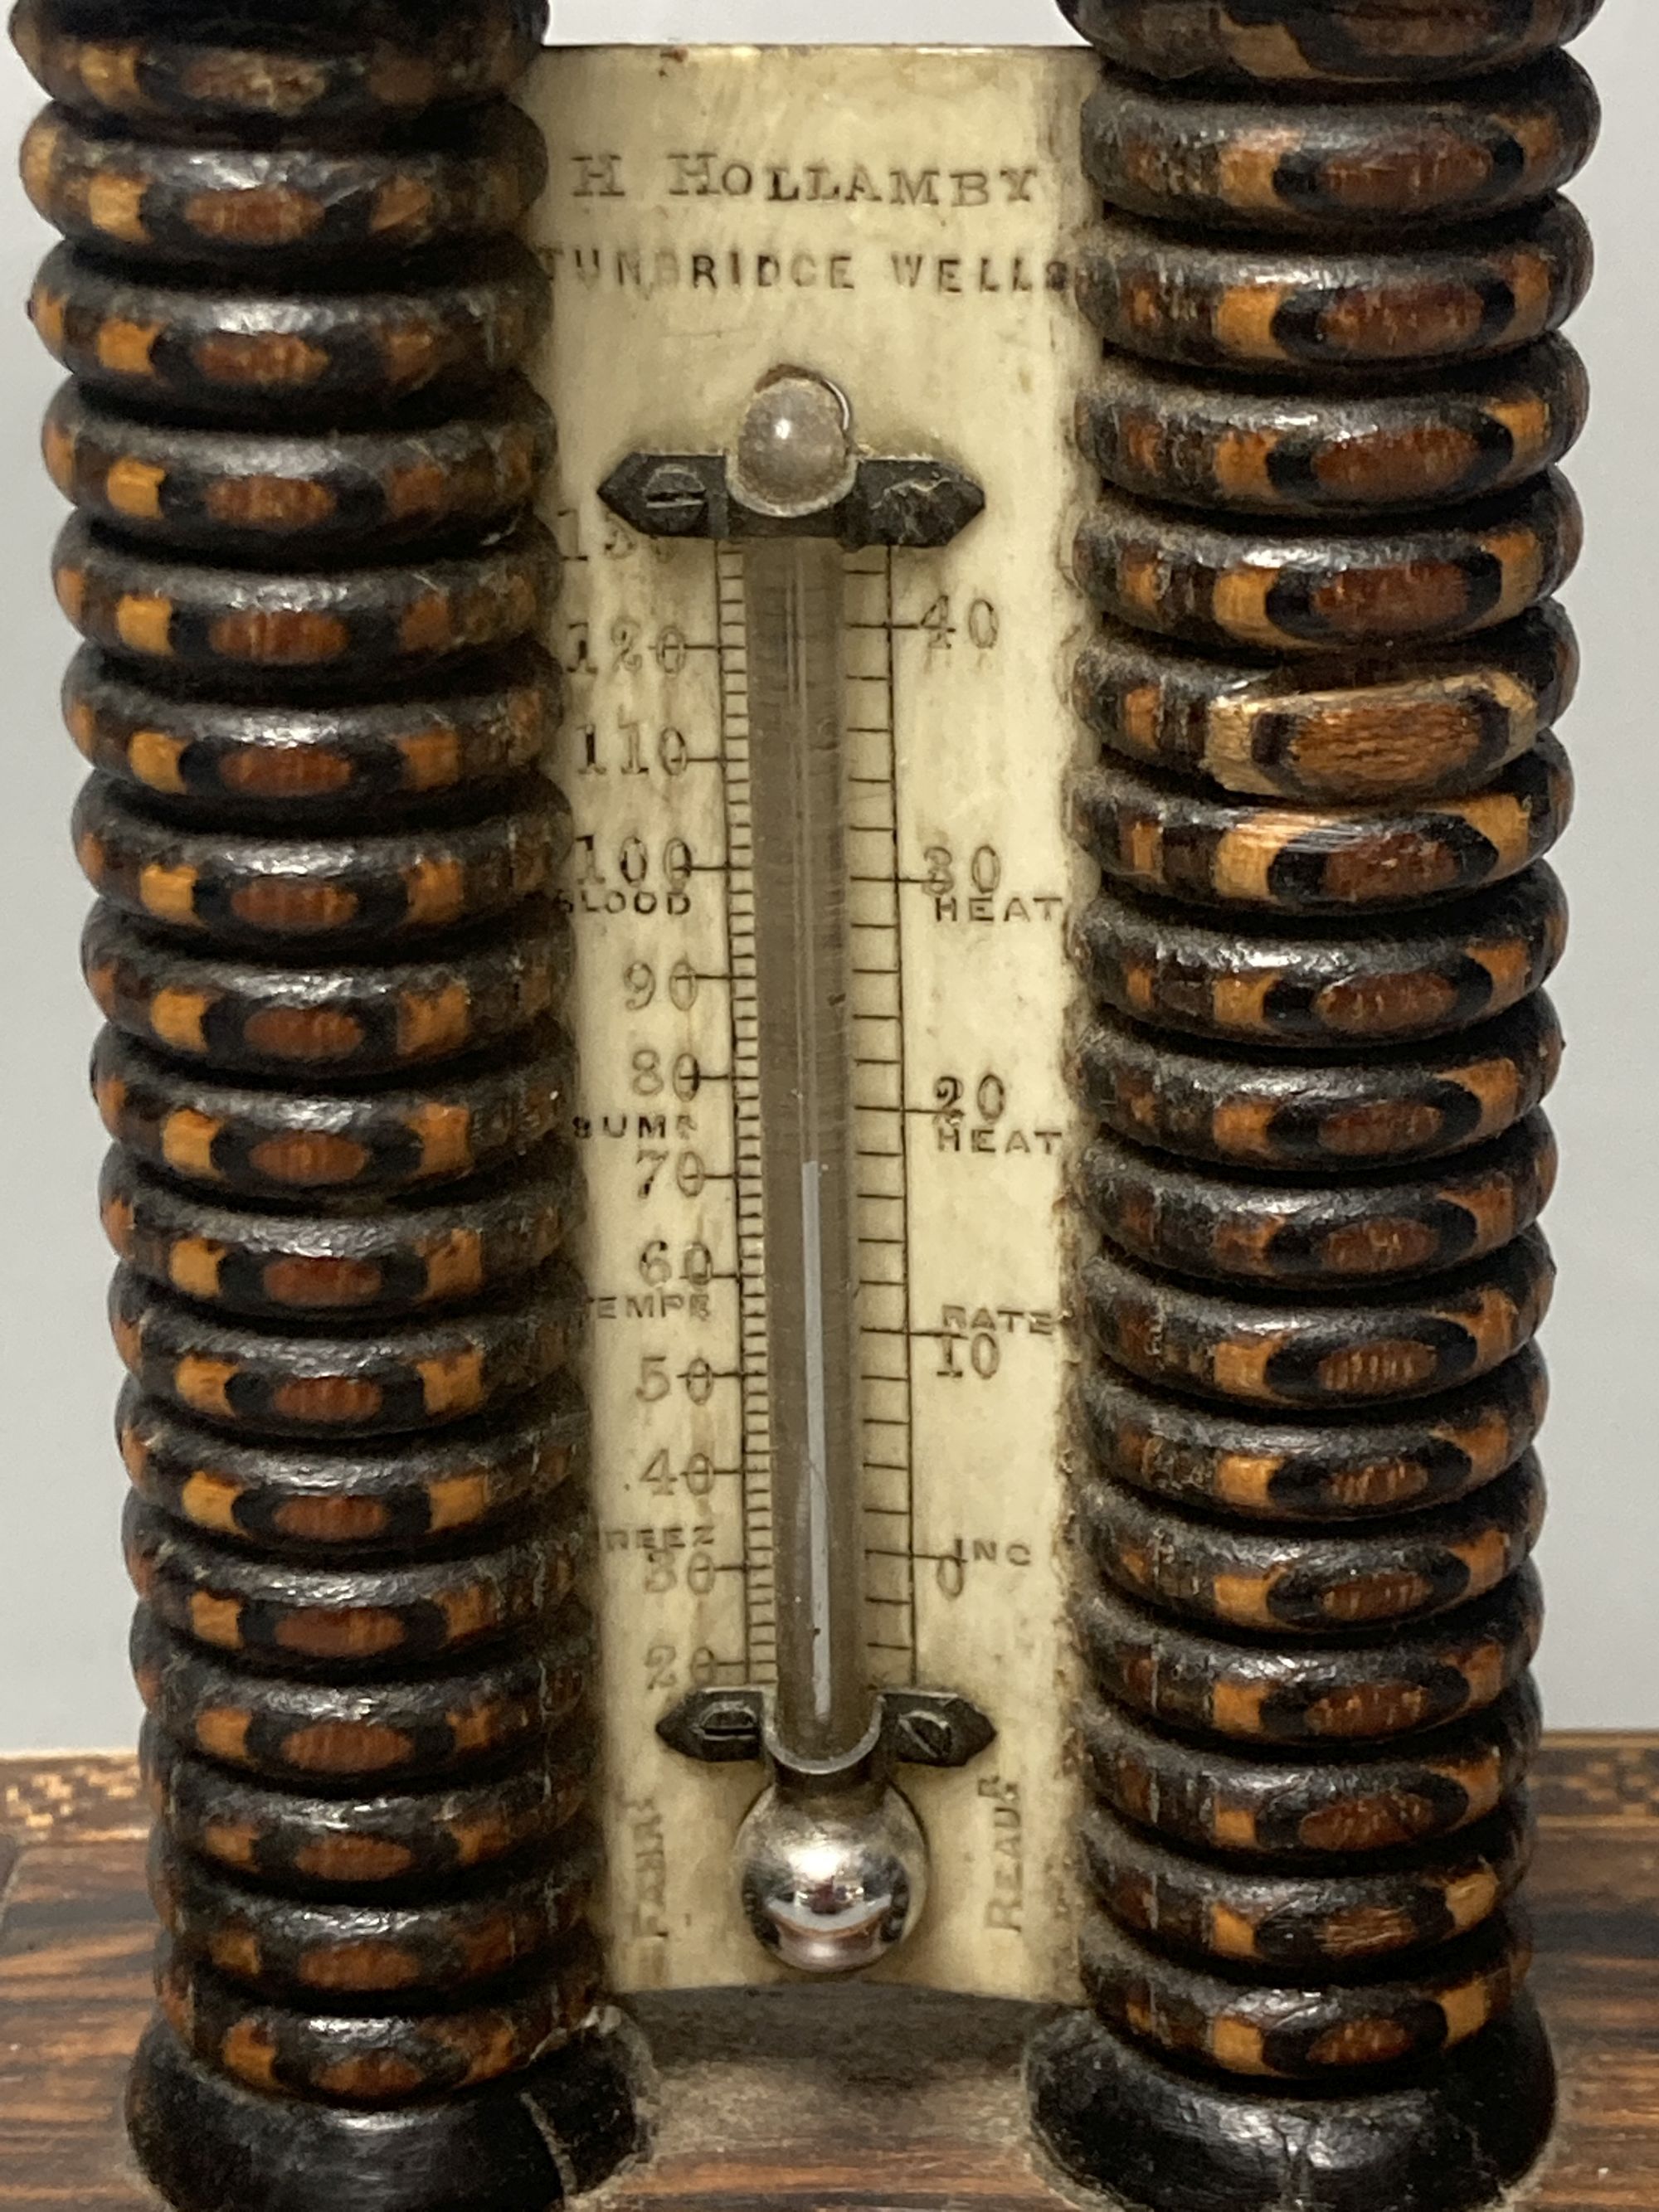 A Tunbridge ware rosewood stickware and tesserae mosaic twin tower thermometer by Henry Hollamby, 12.5cm